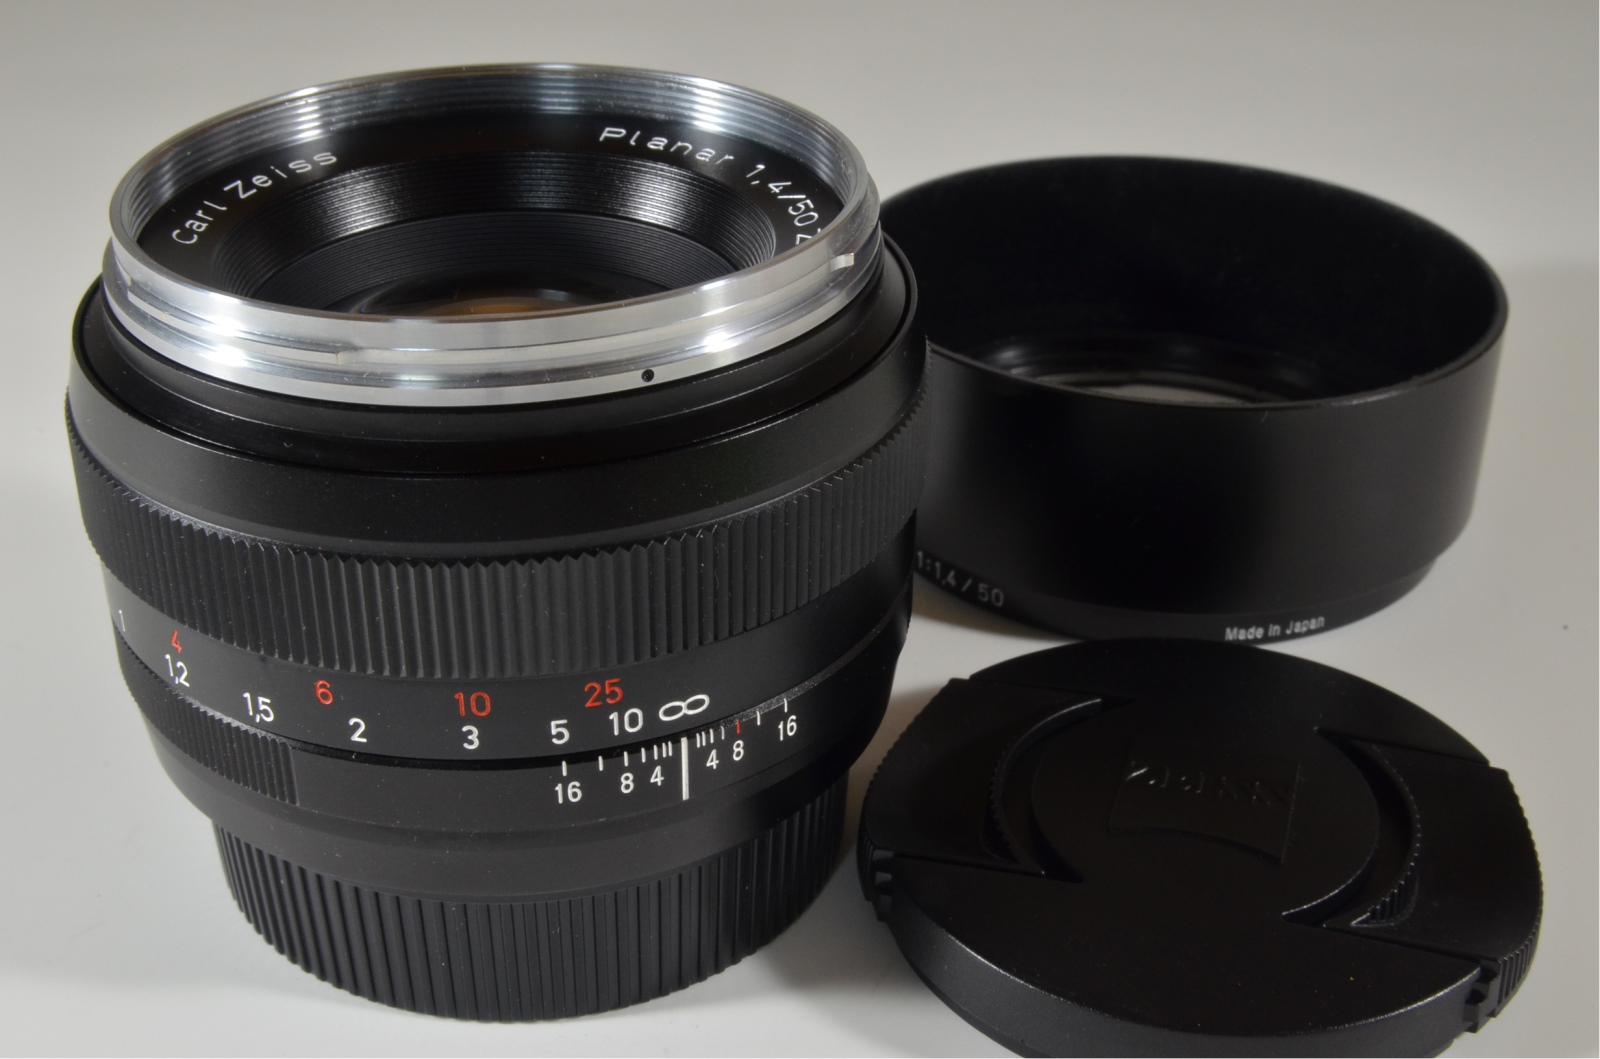 Carl Zeiss Planar T* 50mm f/1.4 ZE for Canon #a0045 – SuperB JAPAN CAMERA